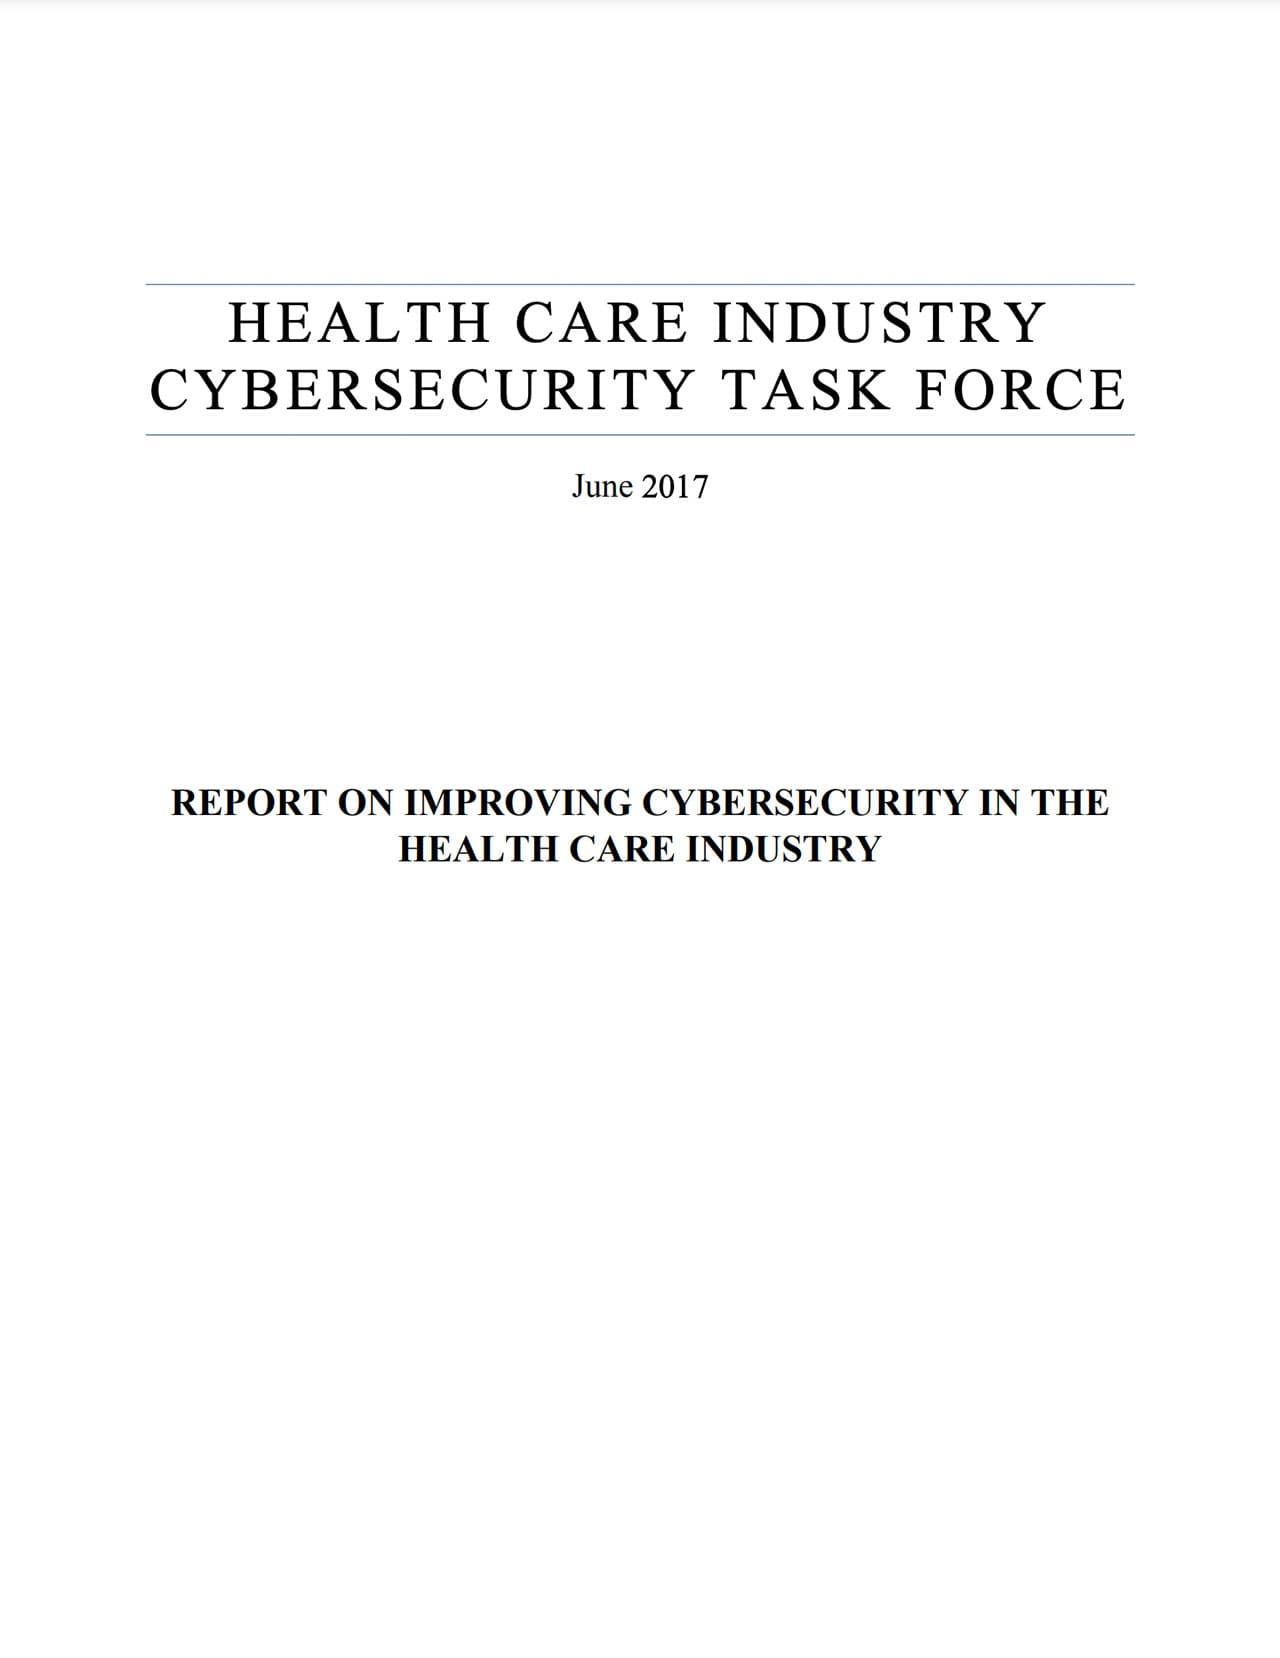 CYBERSECURITY TASK FORCE REPORT ON IMPROVING CYBERSECURITY IN THE HEALTH CARE INDUSTRY